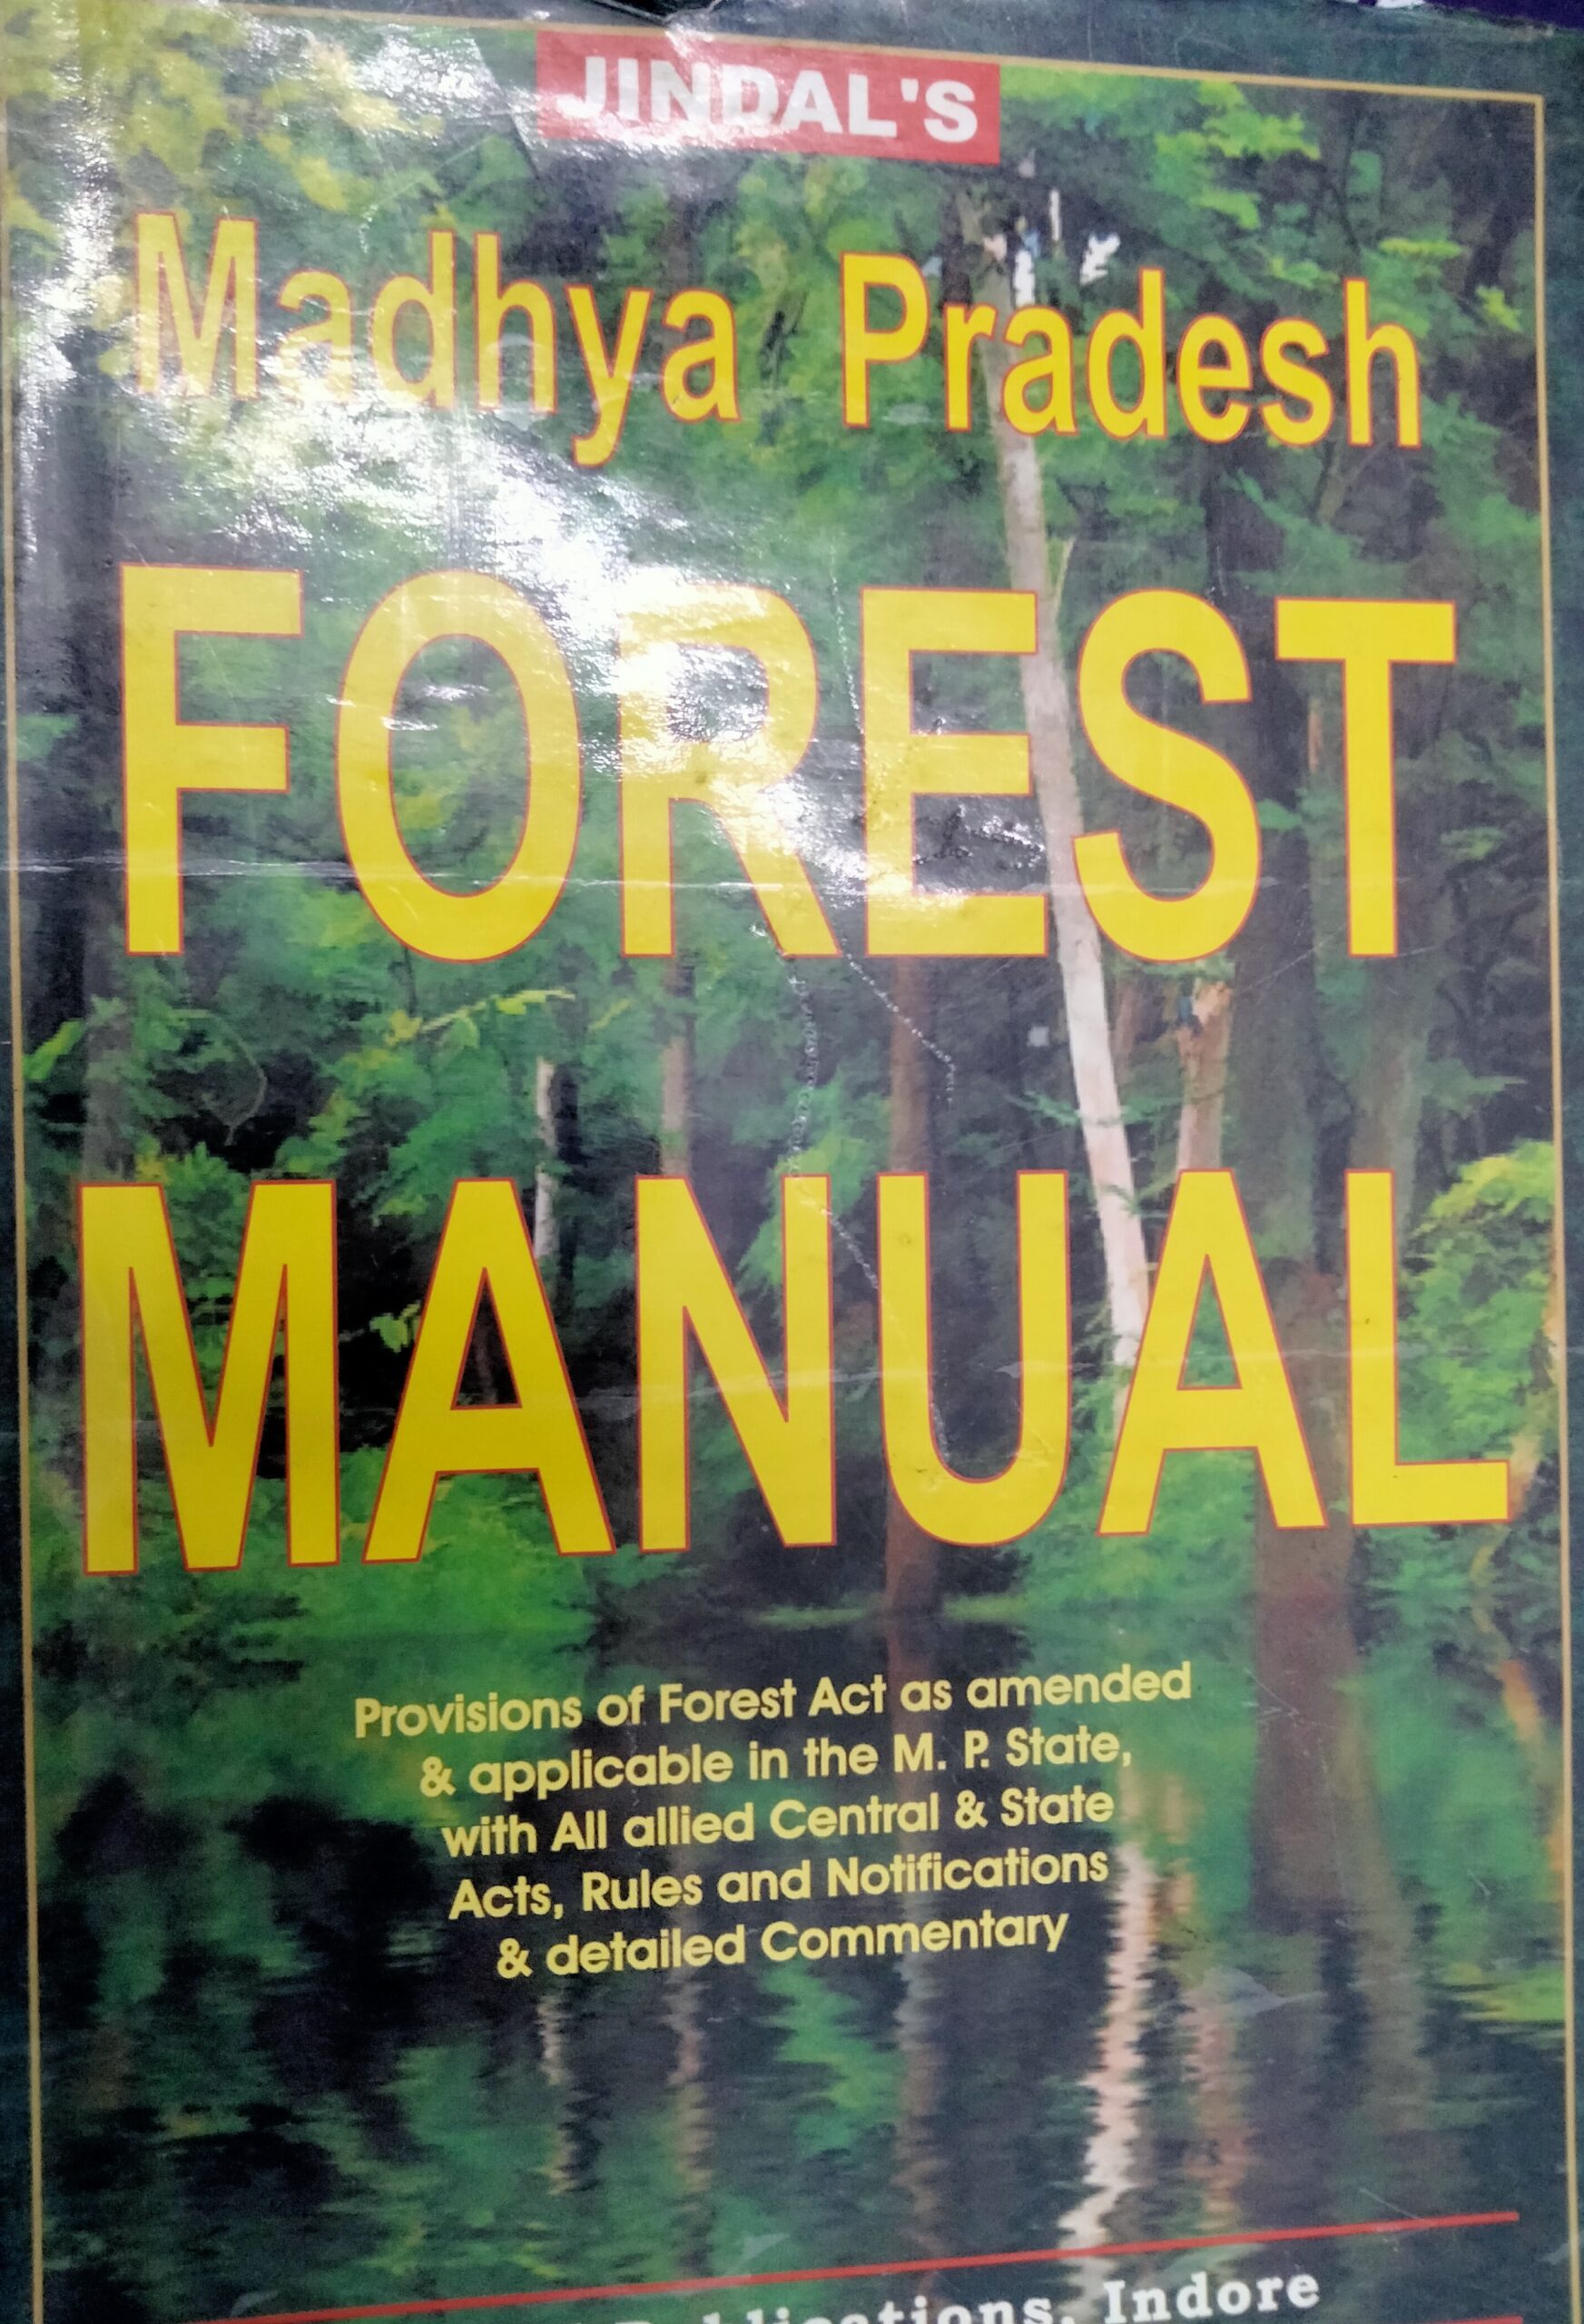 M.P. FOREST MANUAL JINDAL’S  Provisions of Forest Act as amended & applicable in the M.P. State, with All allied Central & State Acts, Rules and Notifications & detailed Commentary